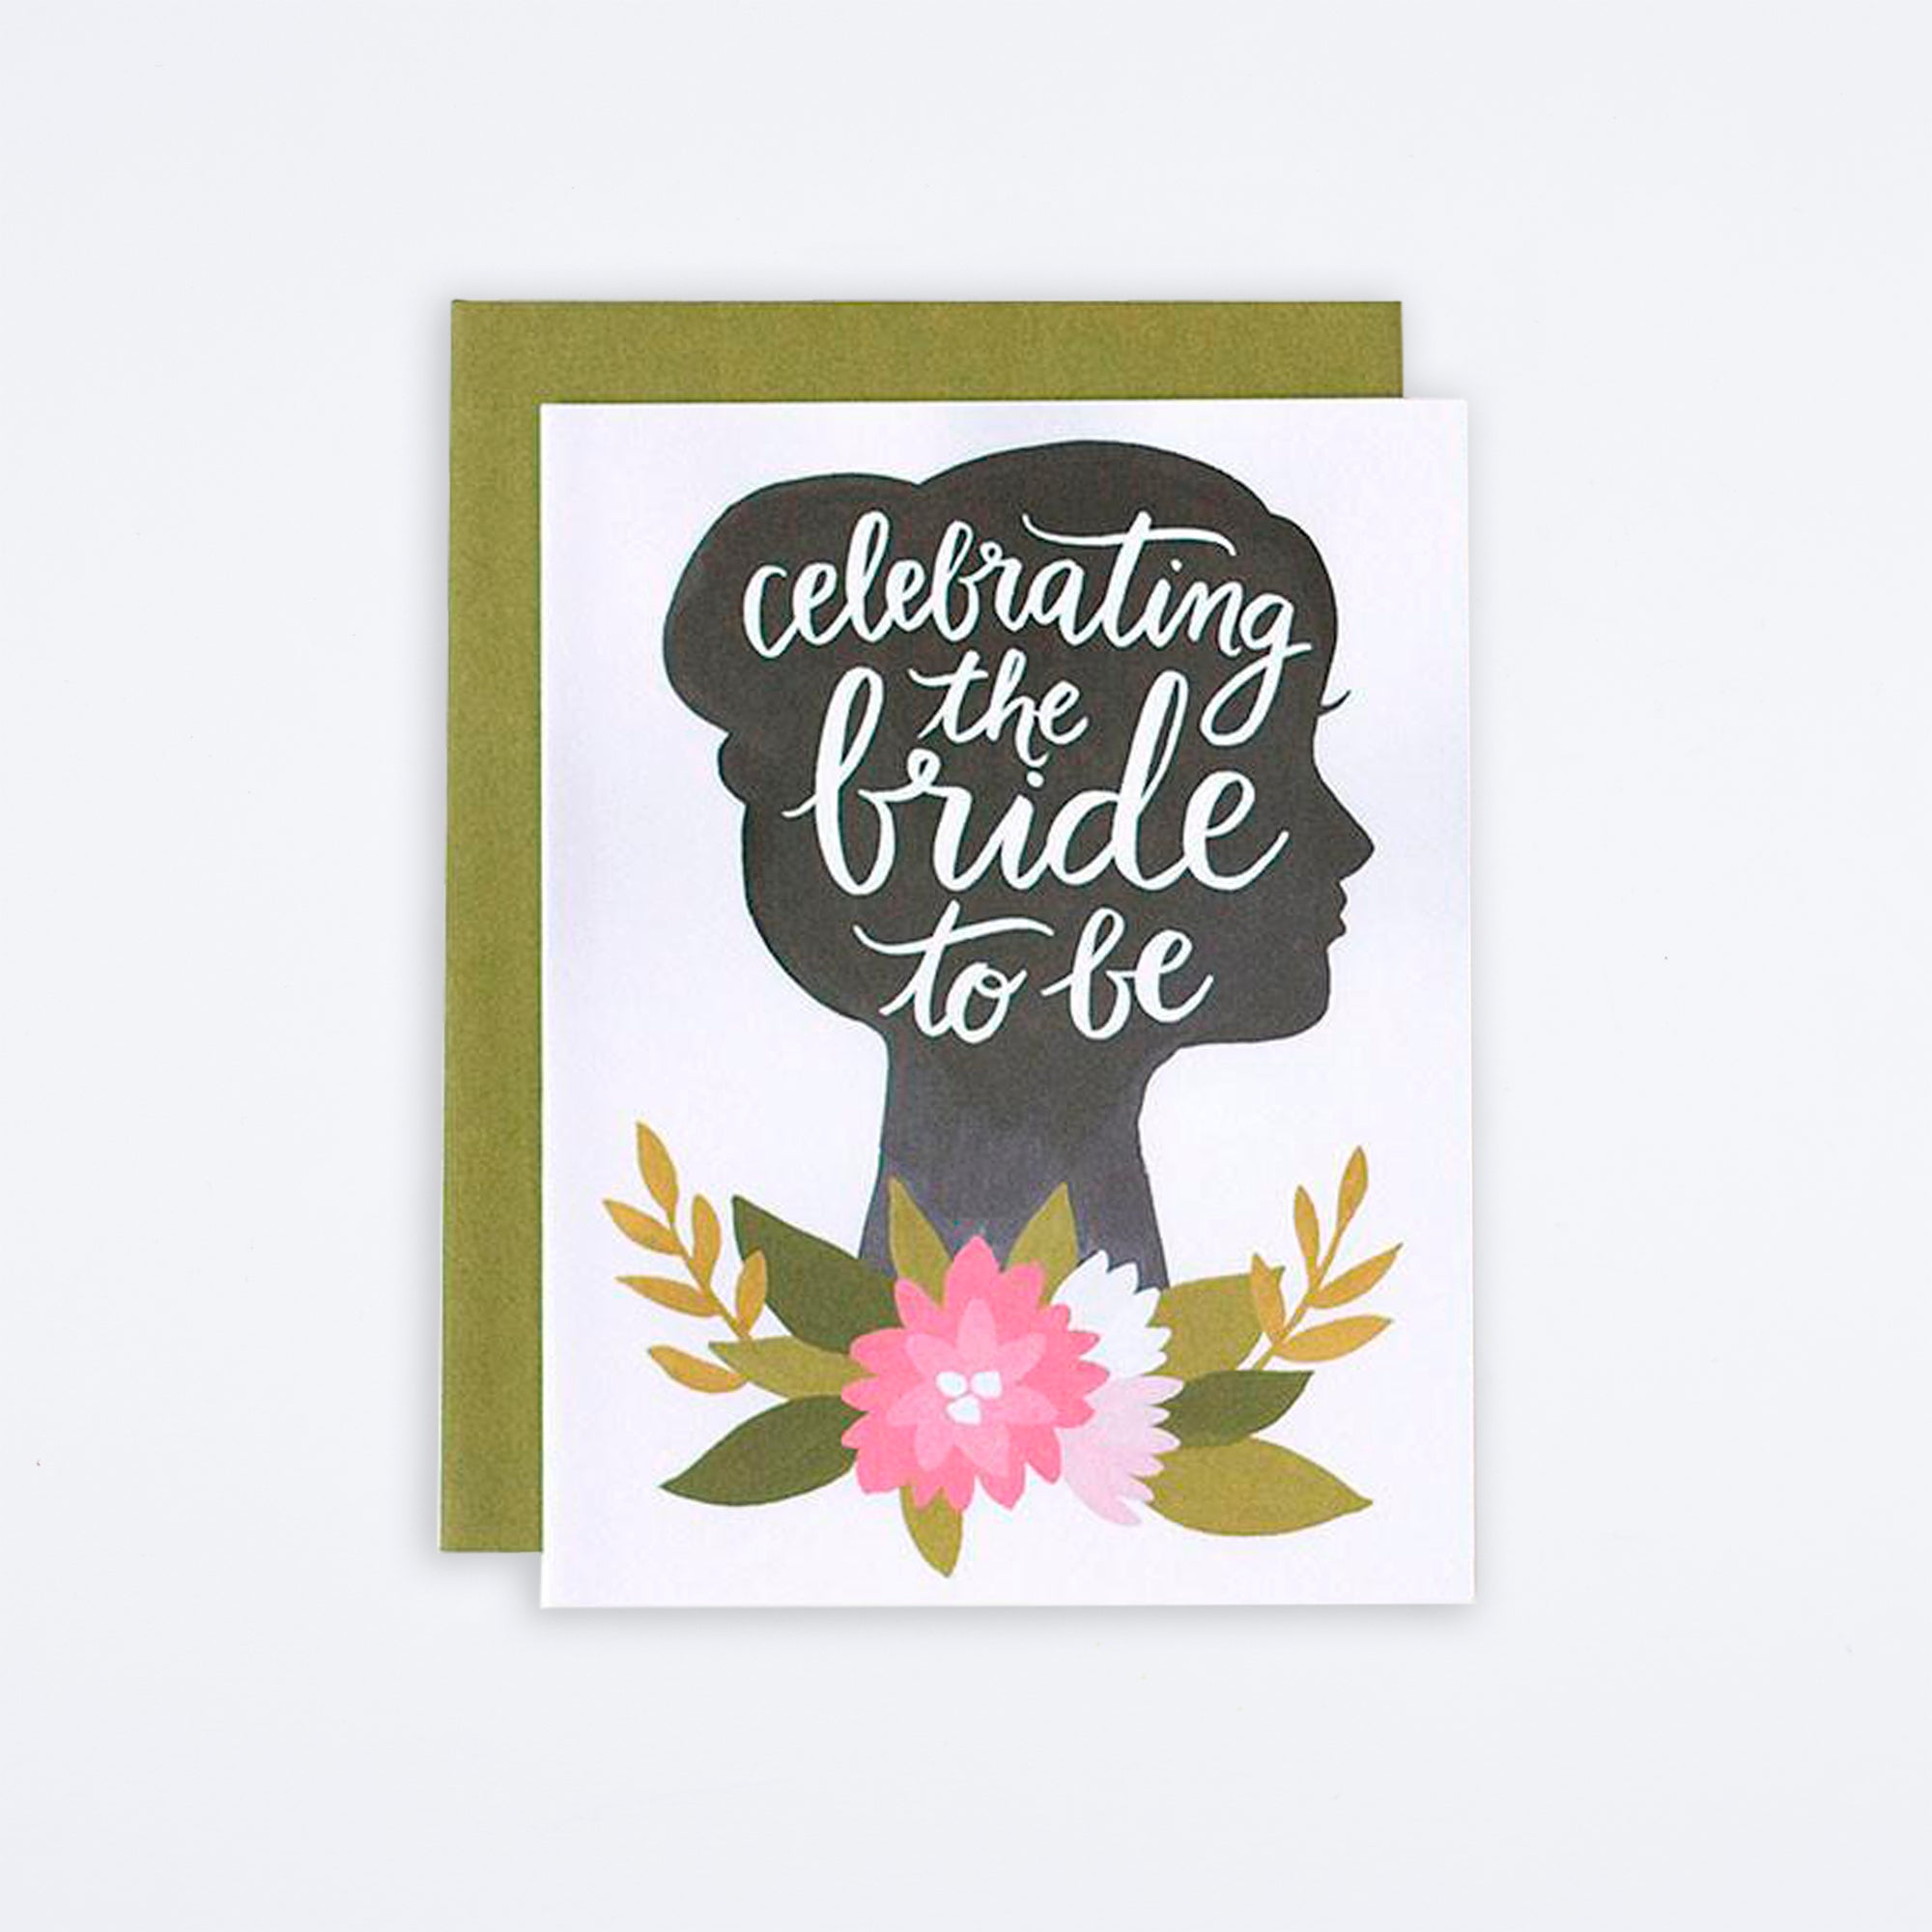 Bride to Be Card